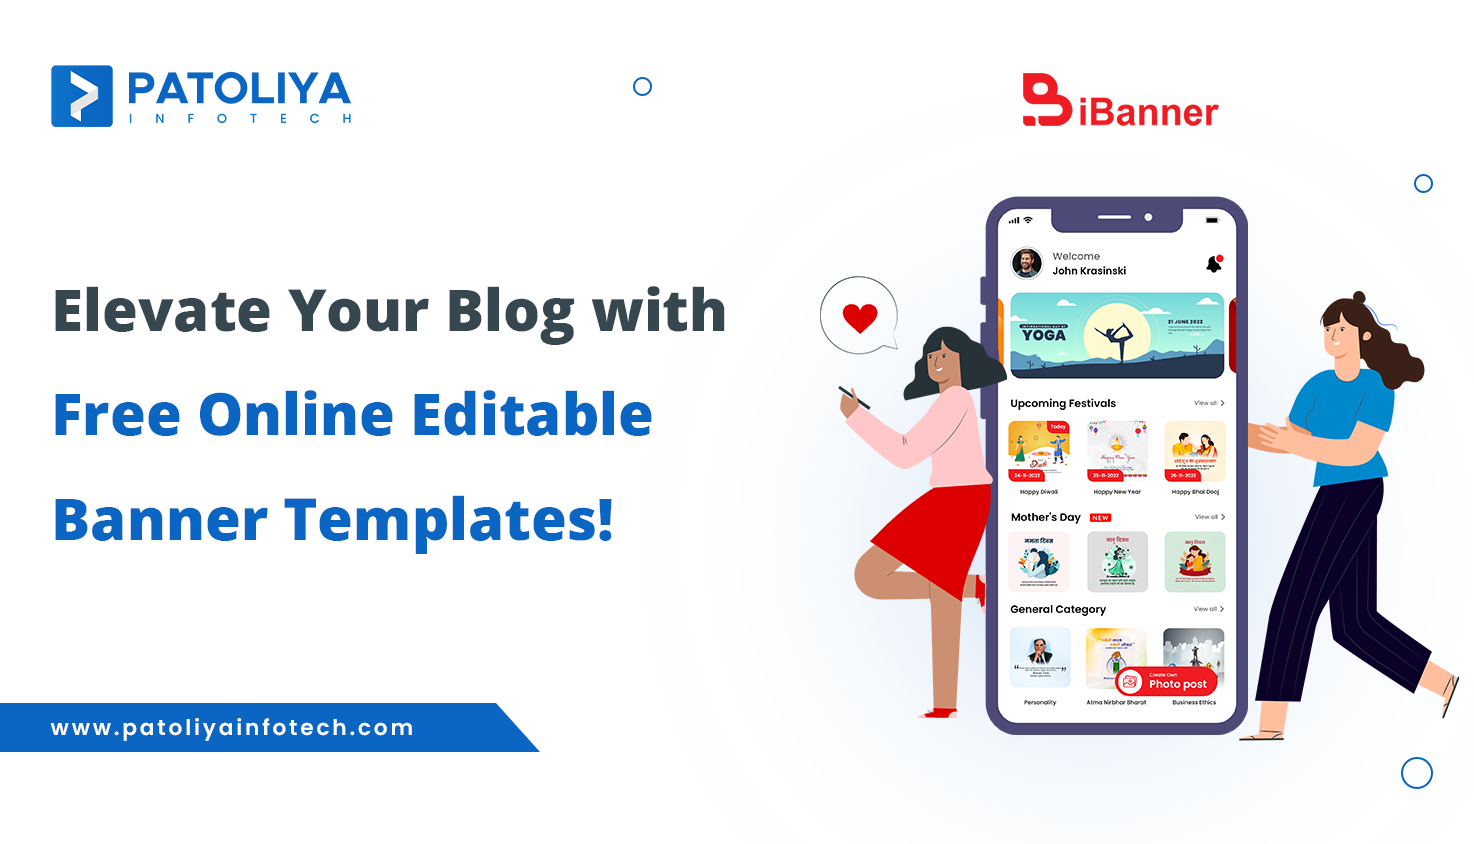 iBanner: Elevate Your Blog with Free Online Editable Banner Templates!